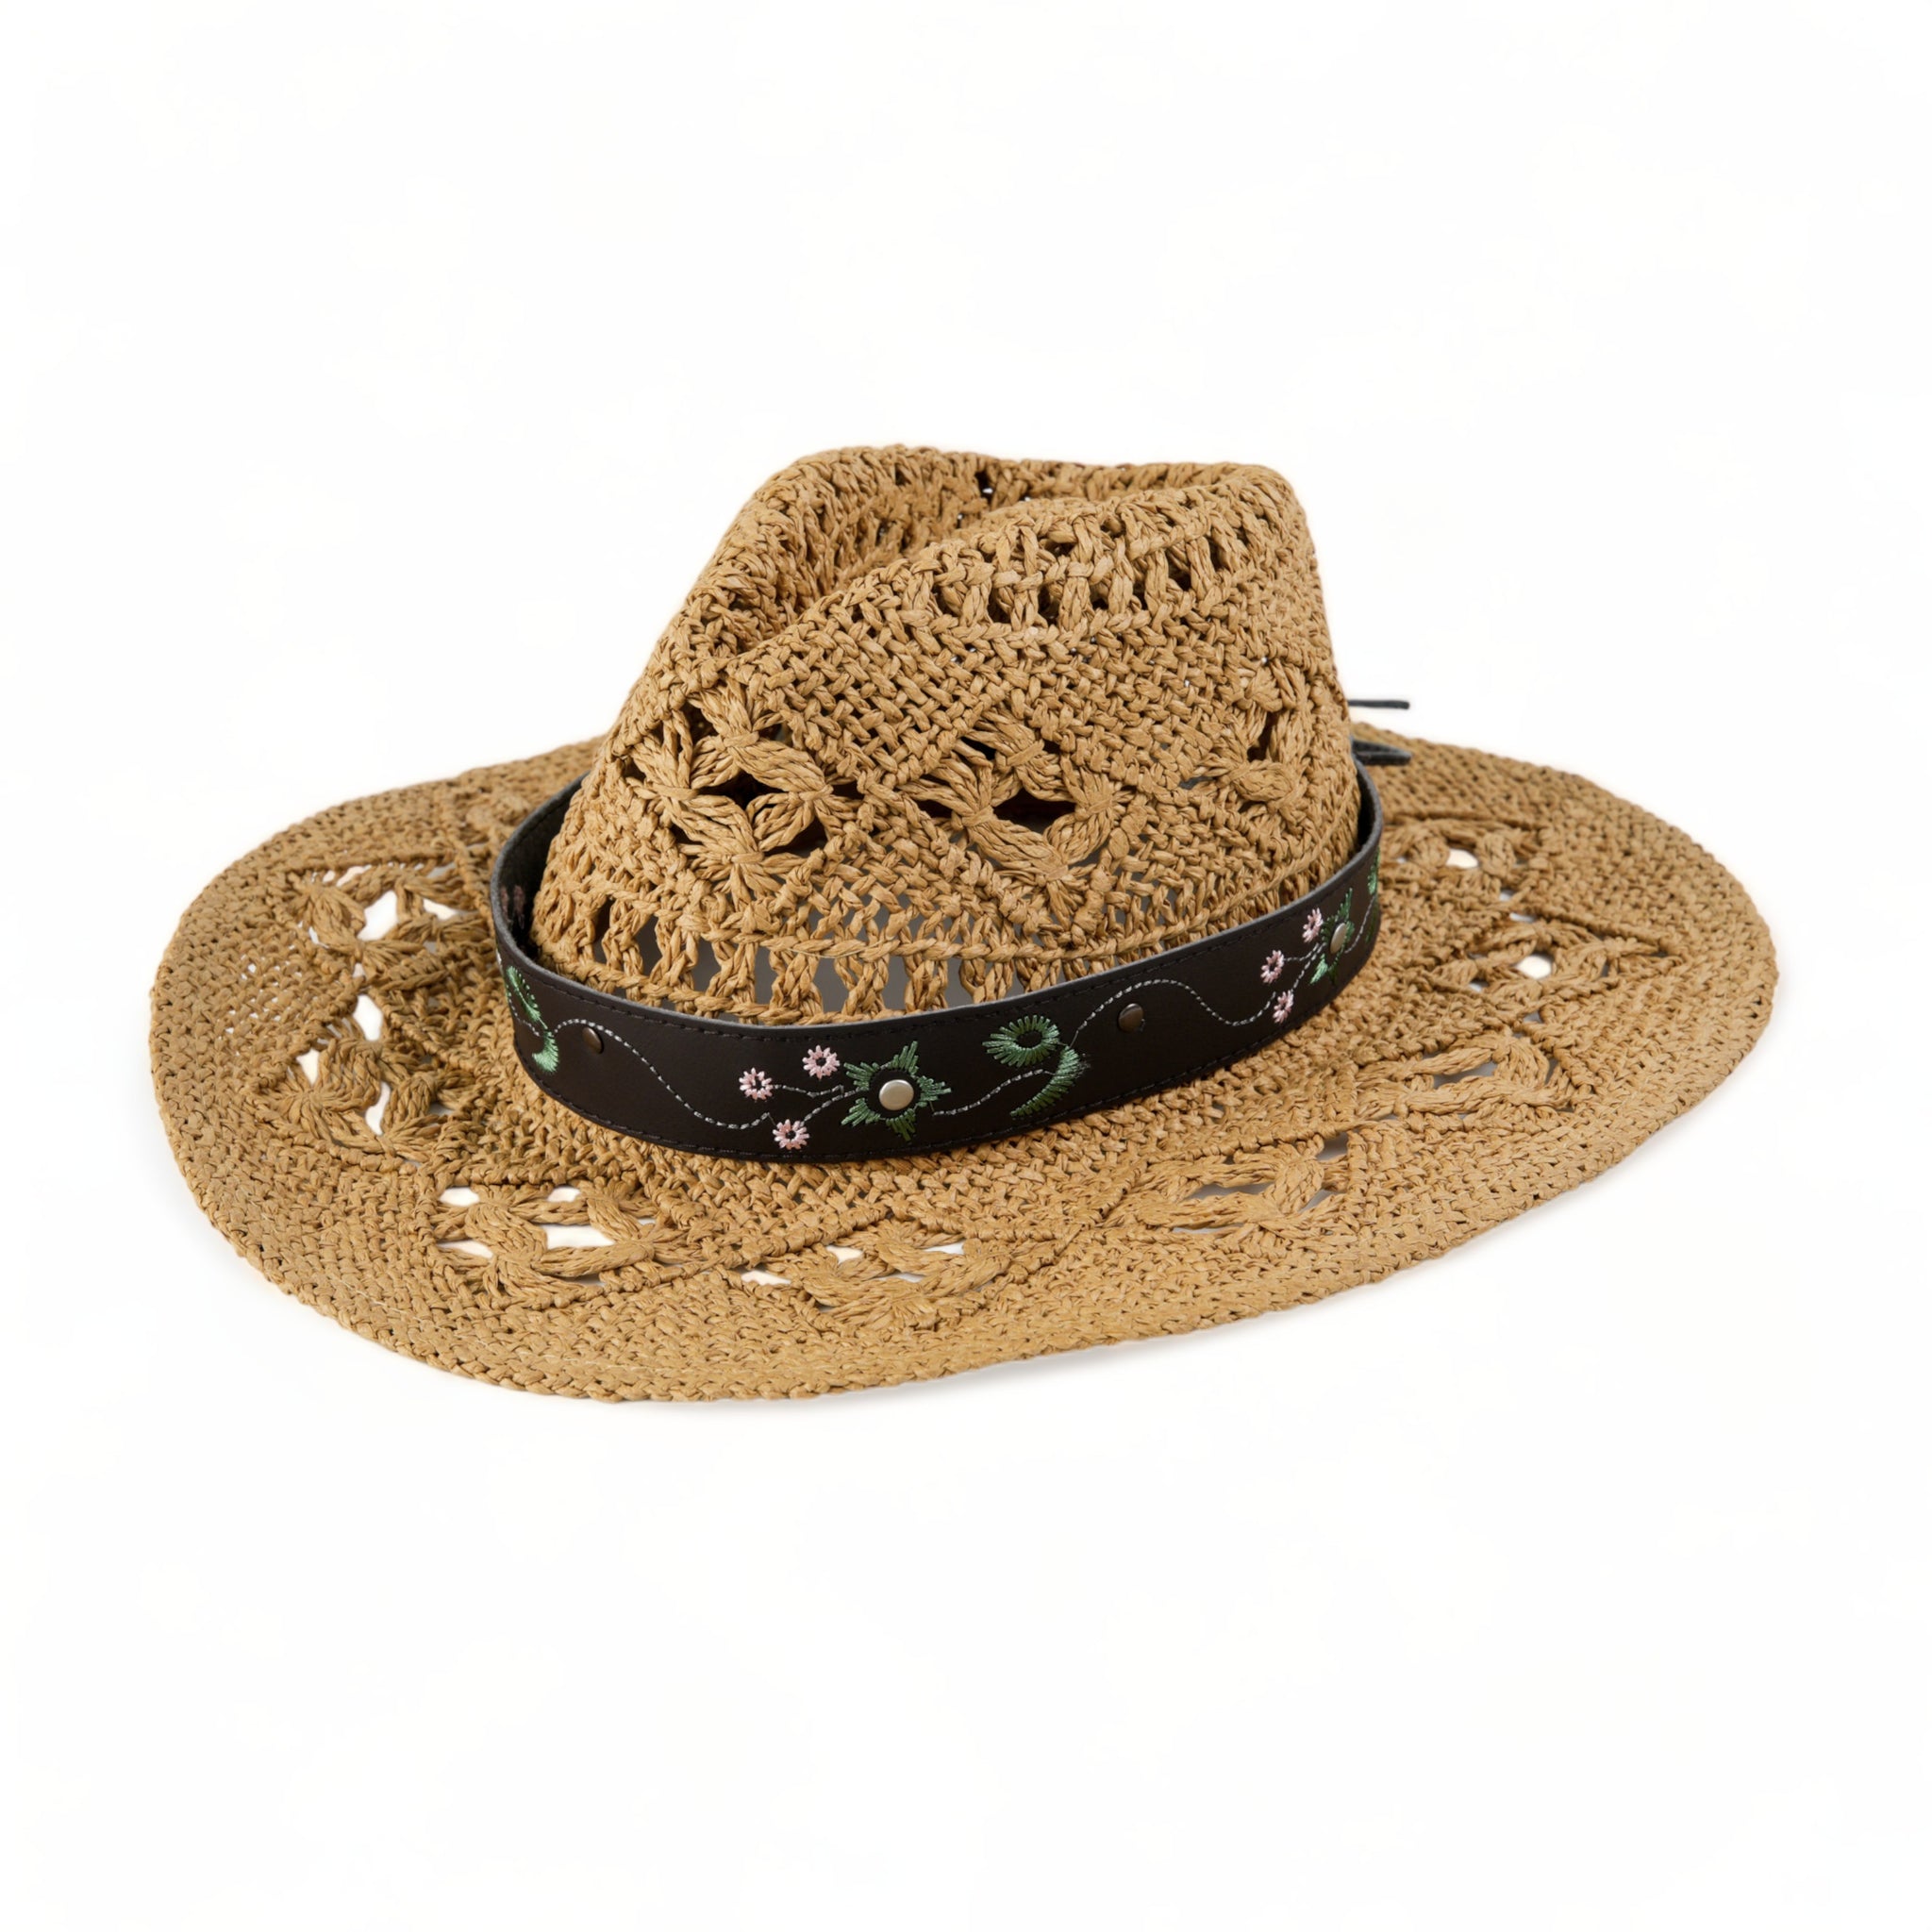 Chokore Handcrafted Cowboy Hat with Embroidered Belt (Khaki)